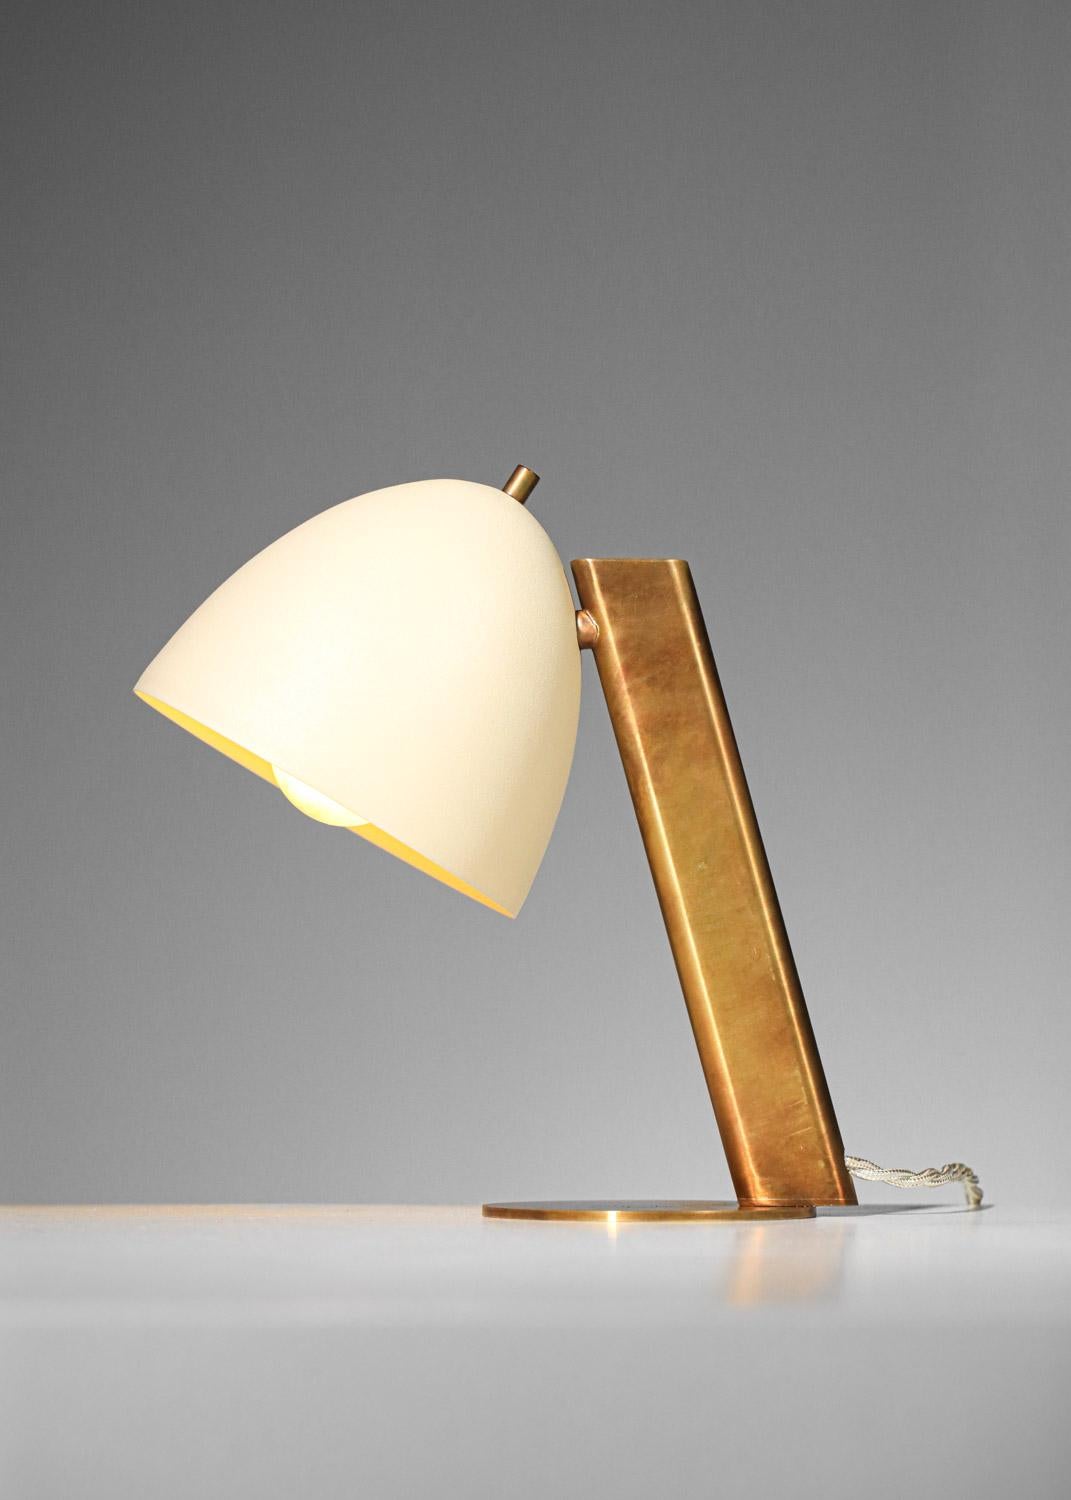 Aluminum Modern bedside lamp brass and lacquered metal, modernist style danke studio For Sale